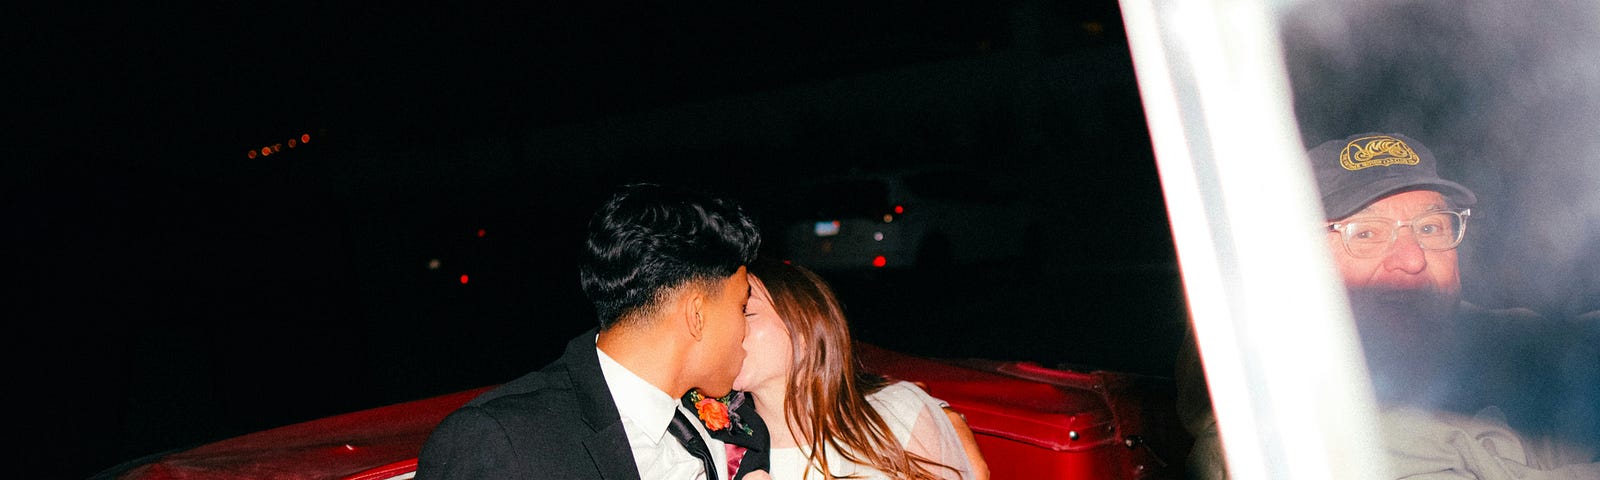 Newlyweds kissing in a car